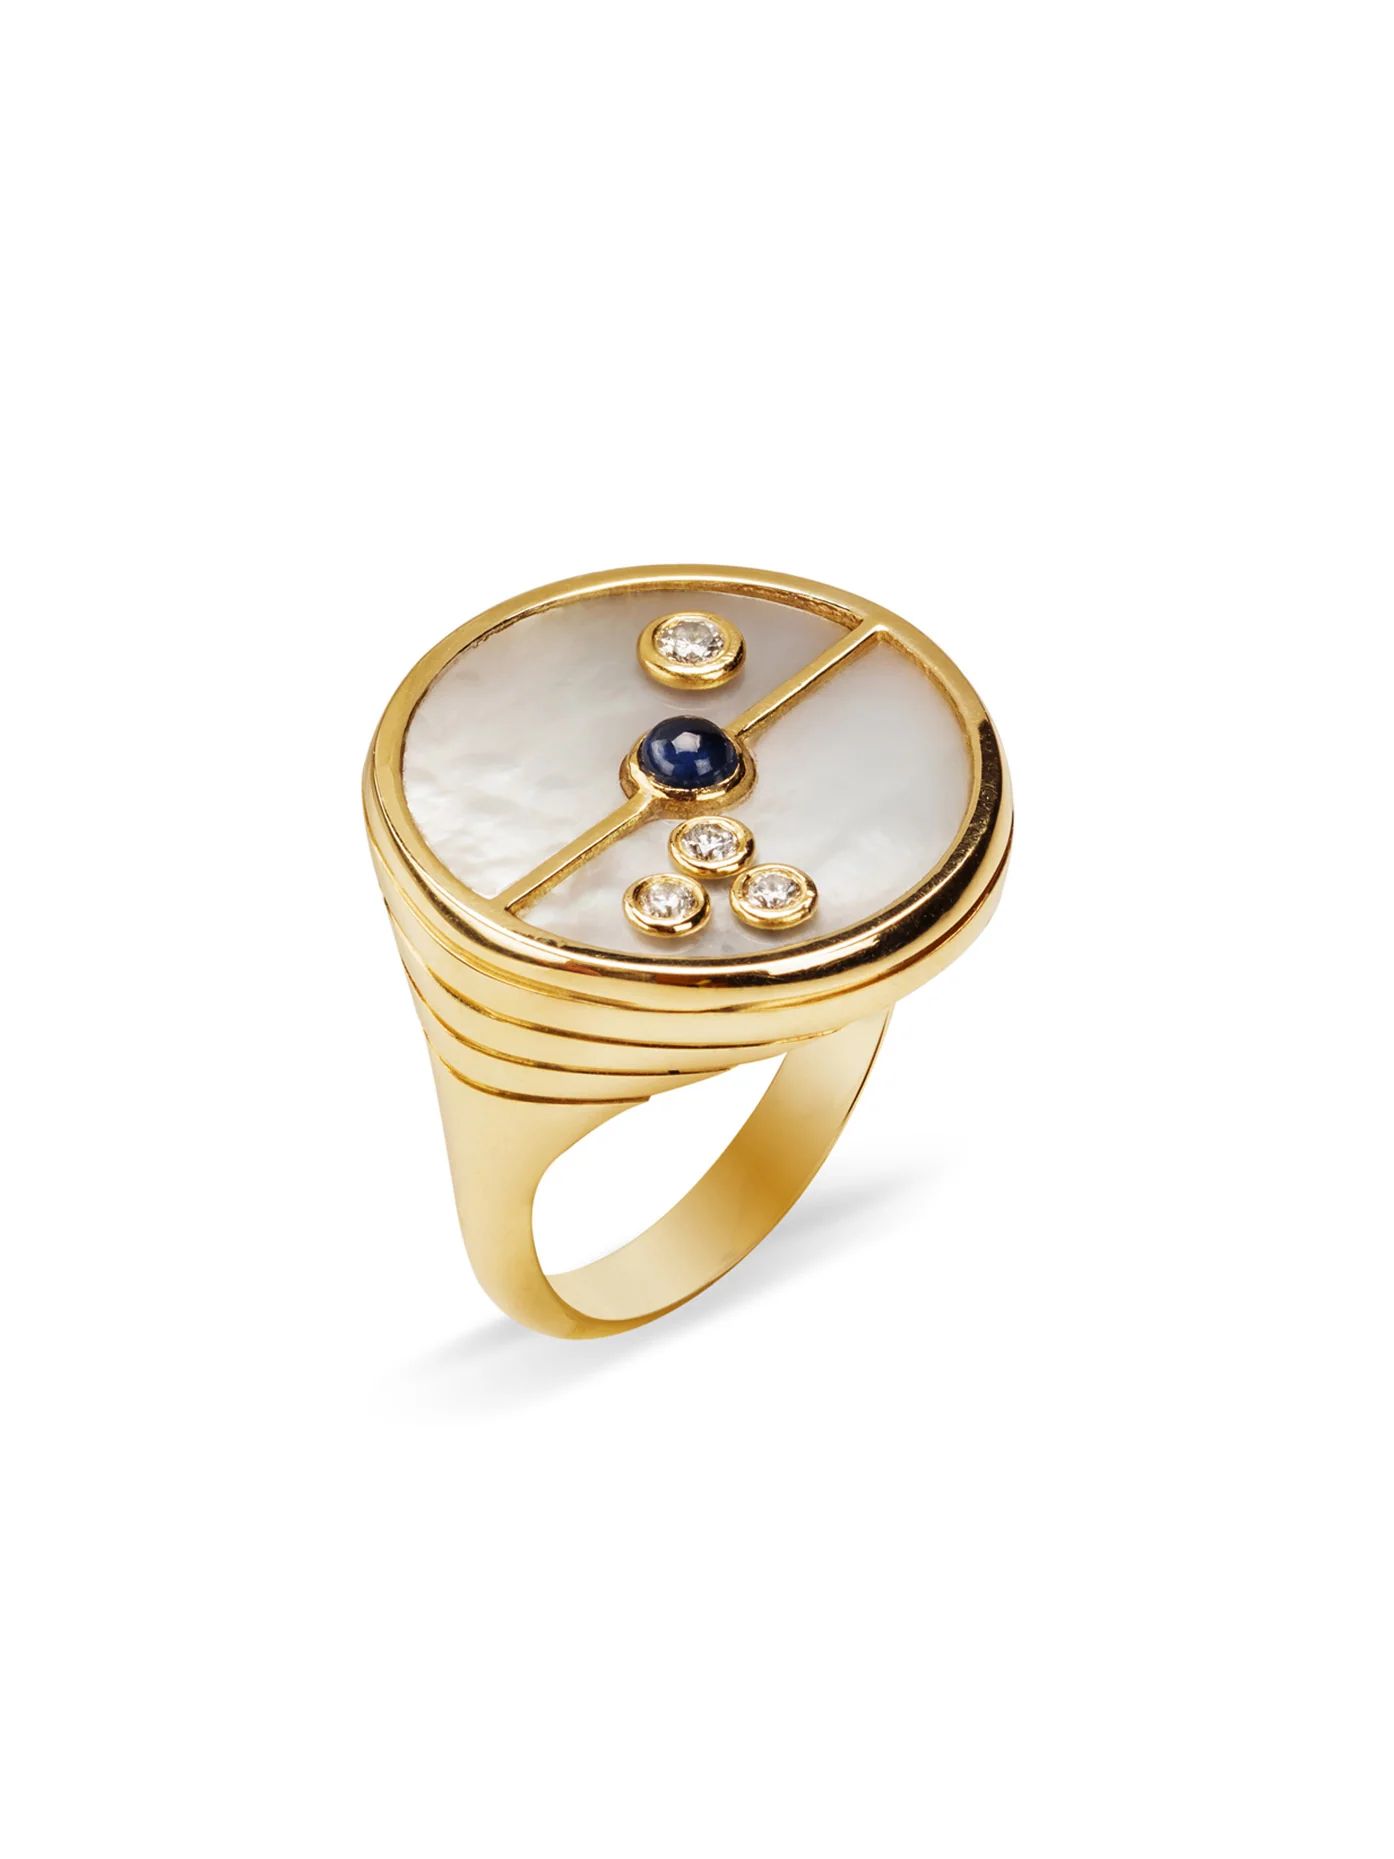 Mother of Pearl and Blue Sapphire Compass Yellow Gold Ring | YLANG 23